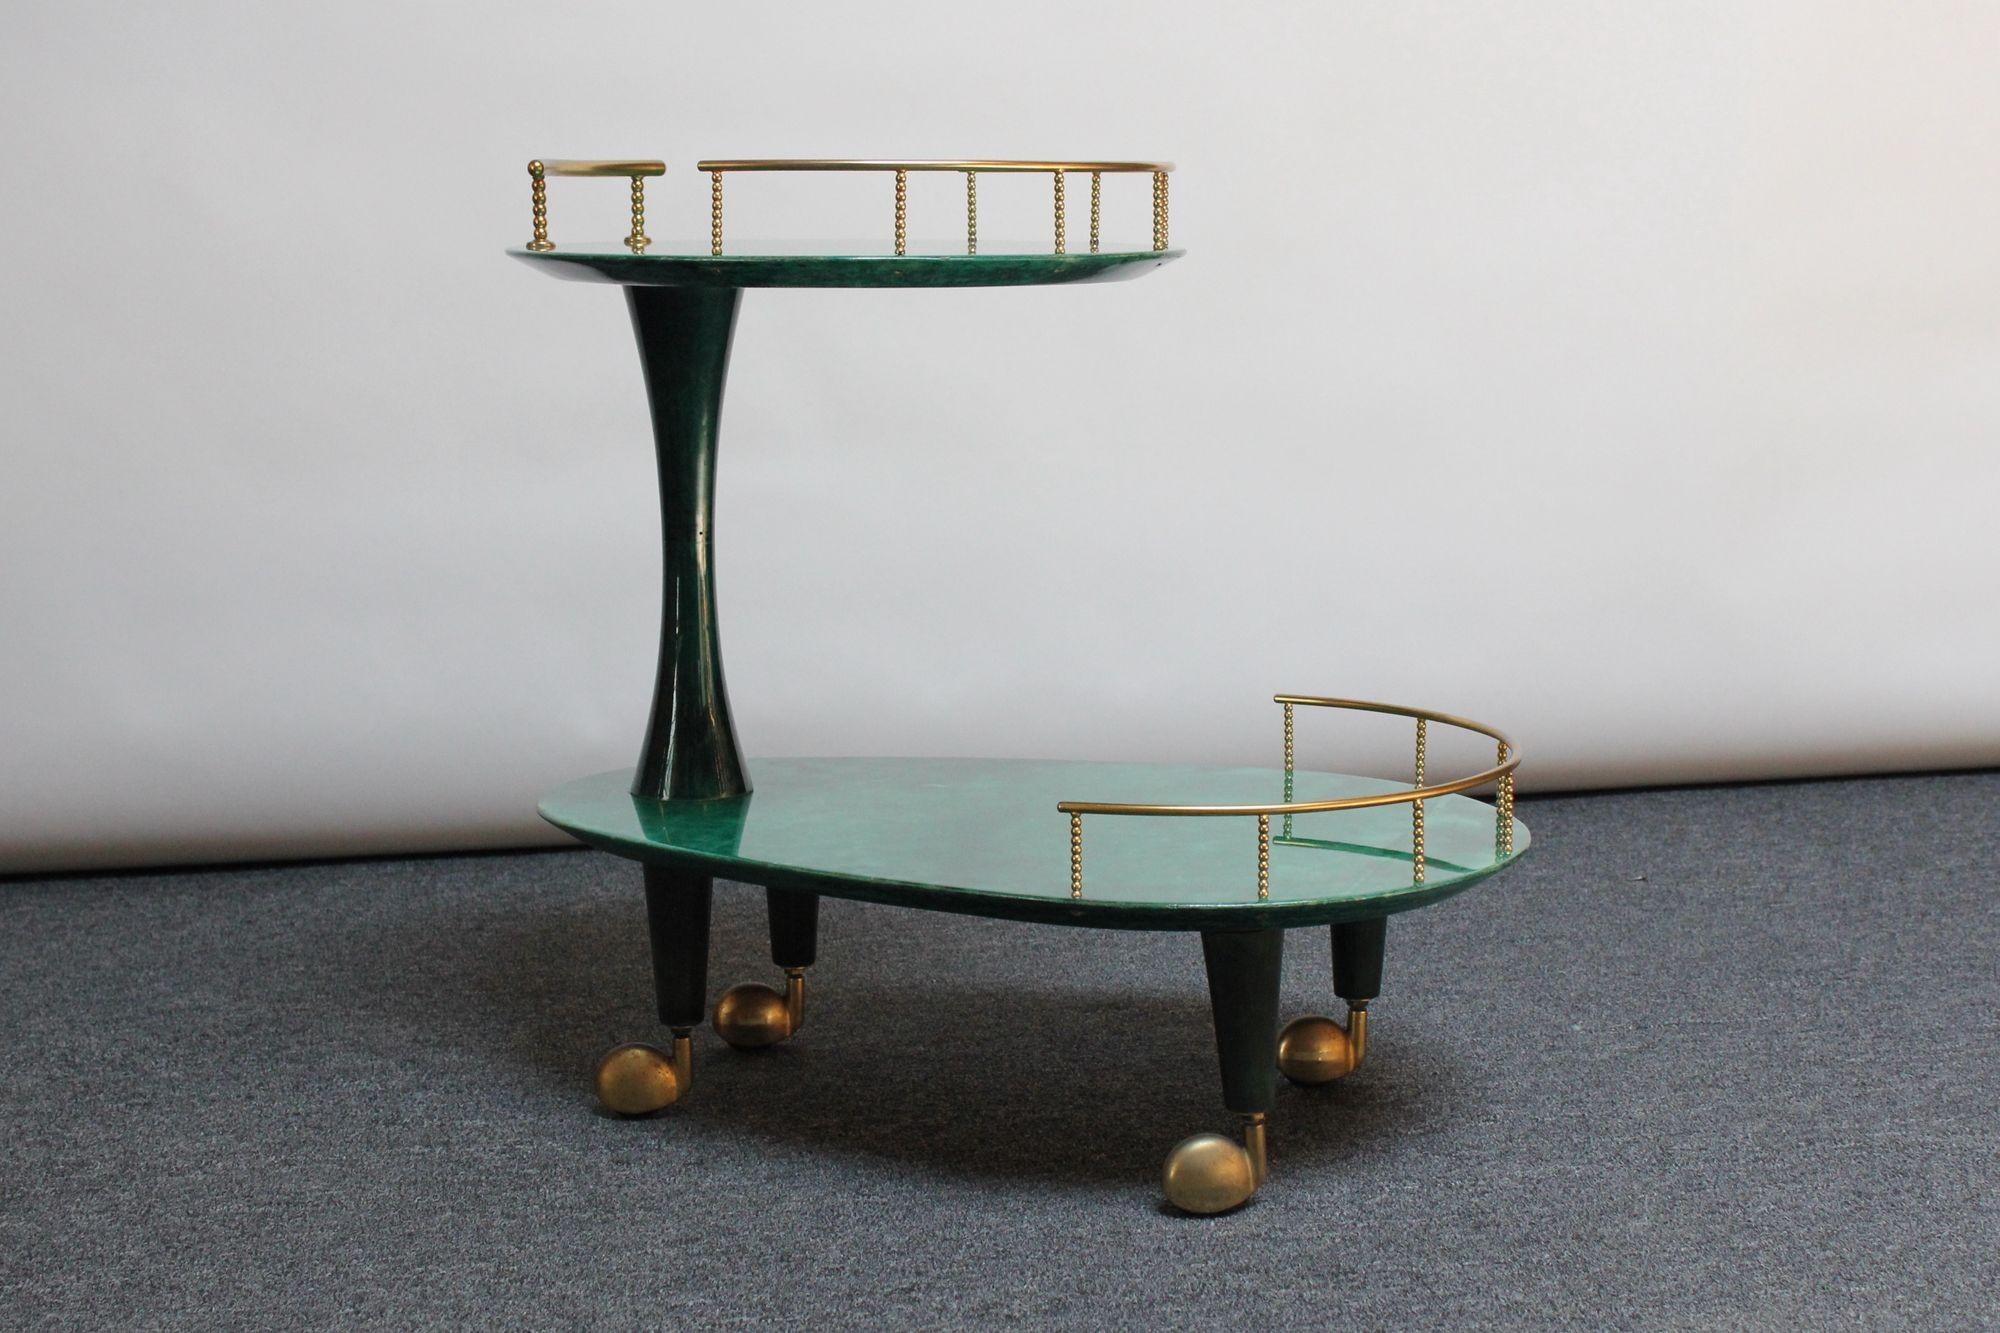 Mid-Century Italian Modern bar cart / trolley designed in the 1950s by Aldo Tura.
Composed of two dyed malachite green goatskin surfaces connected by a sculptural pillar, all supported by brass caster wheels.
Uncommon, striking and desirable green